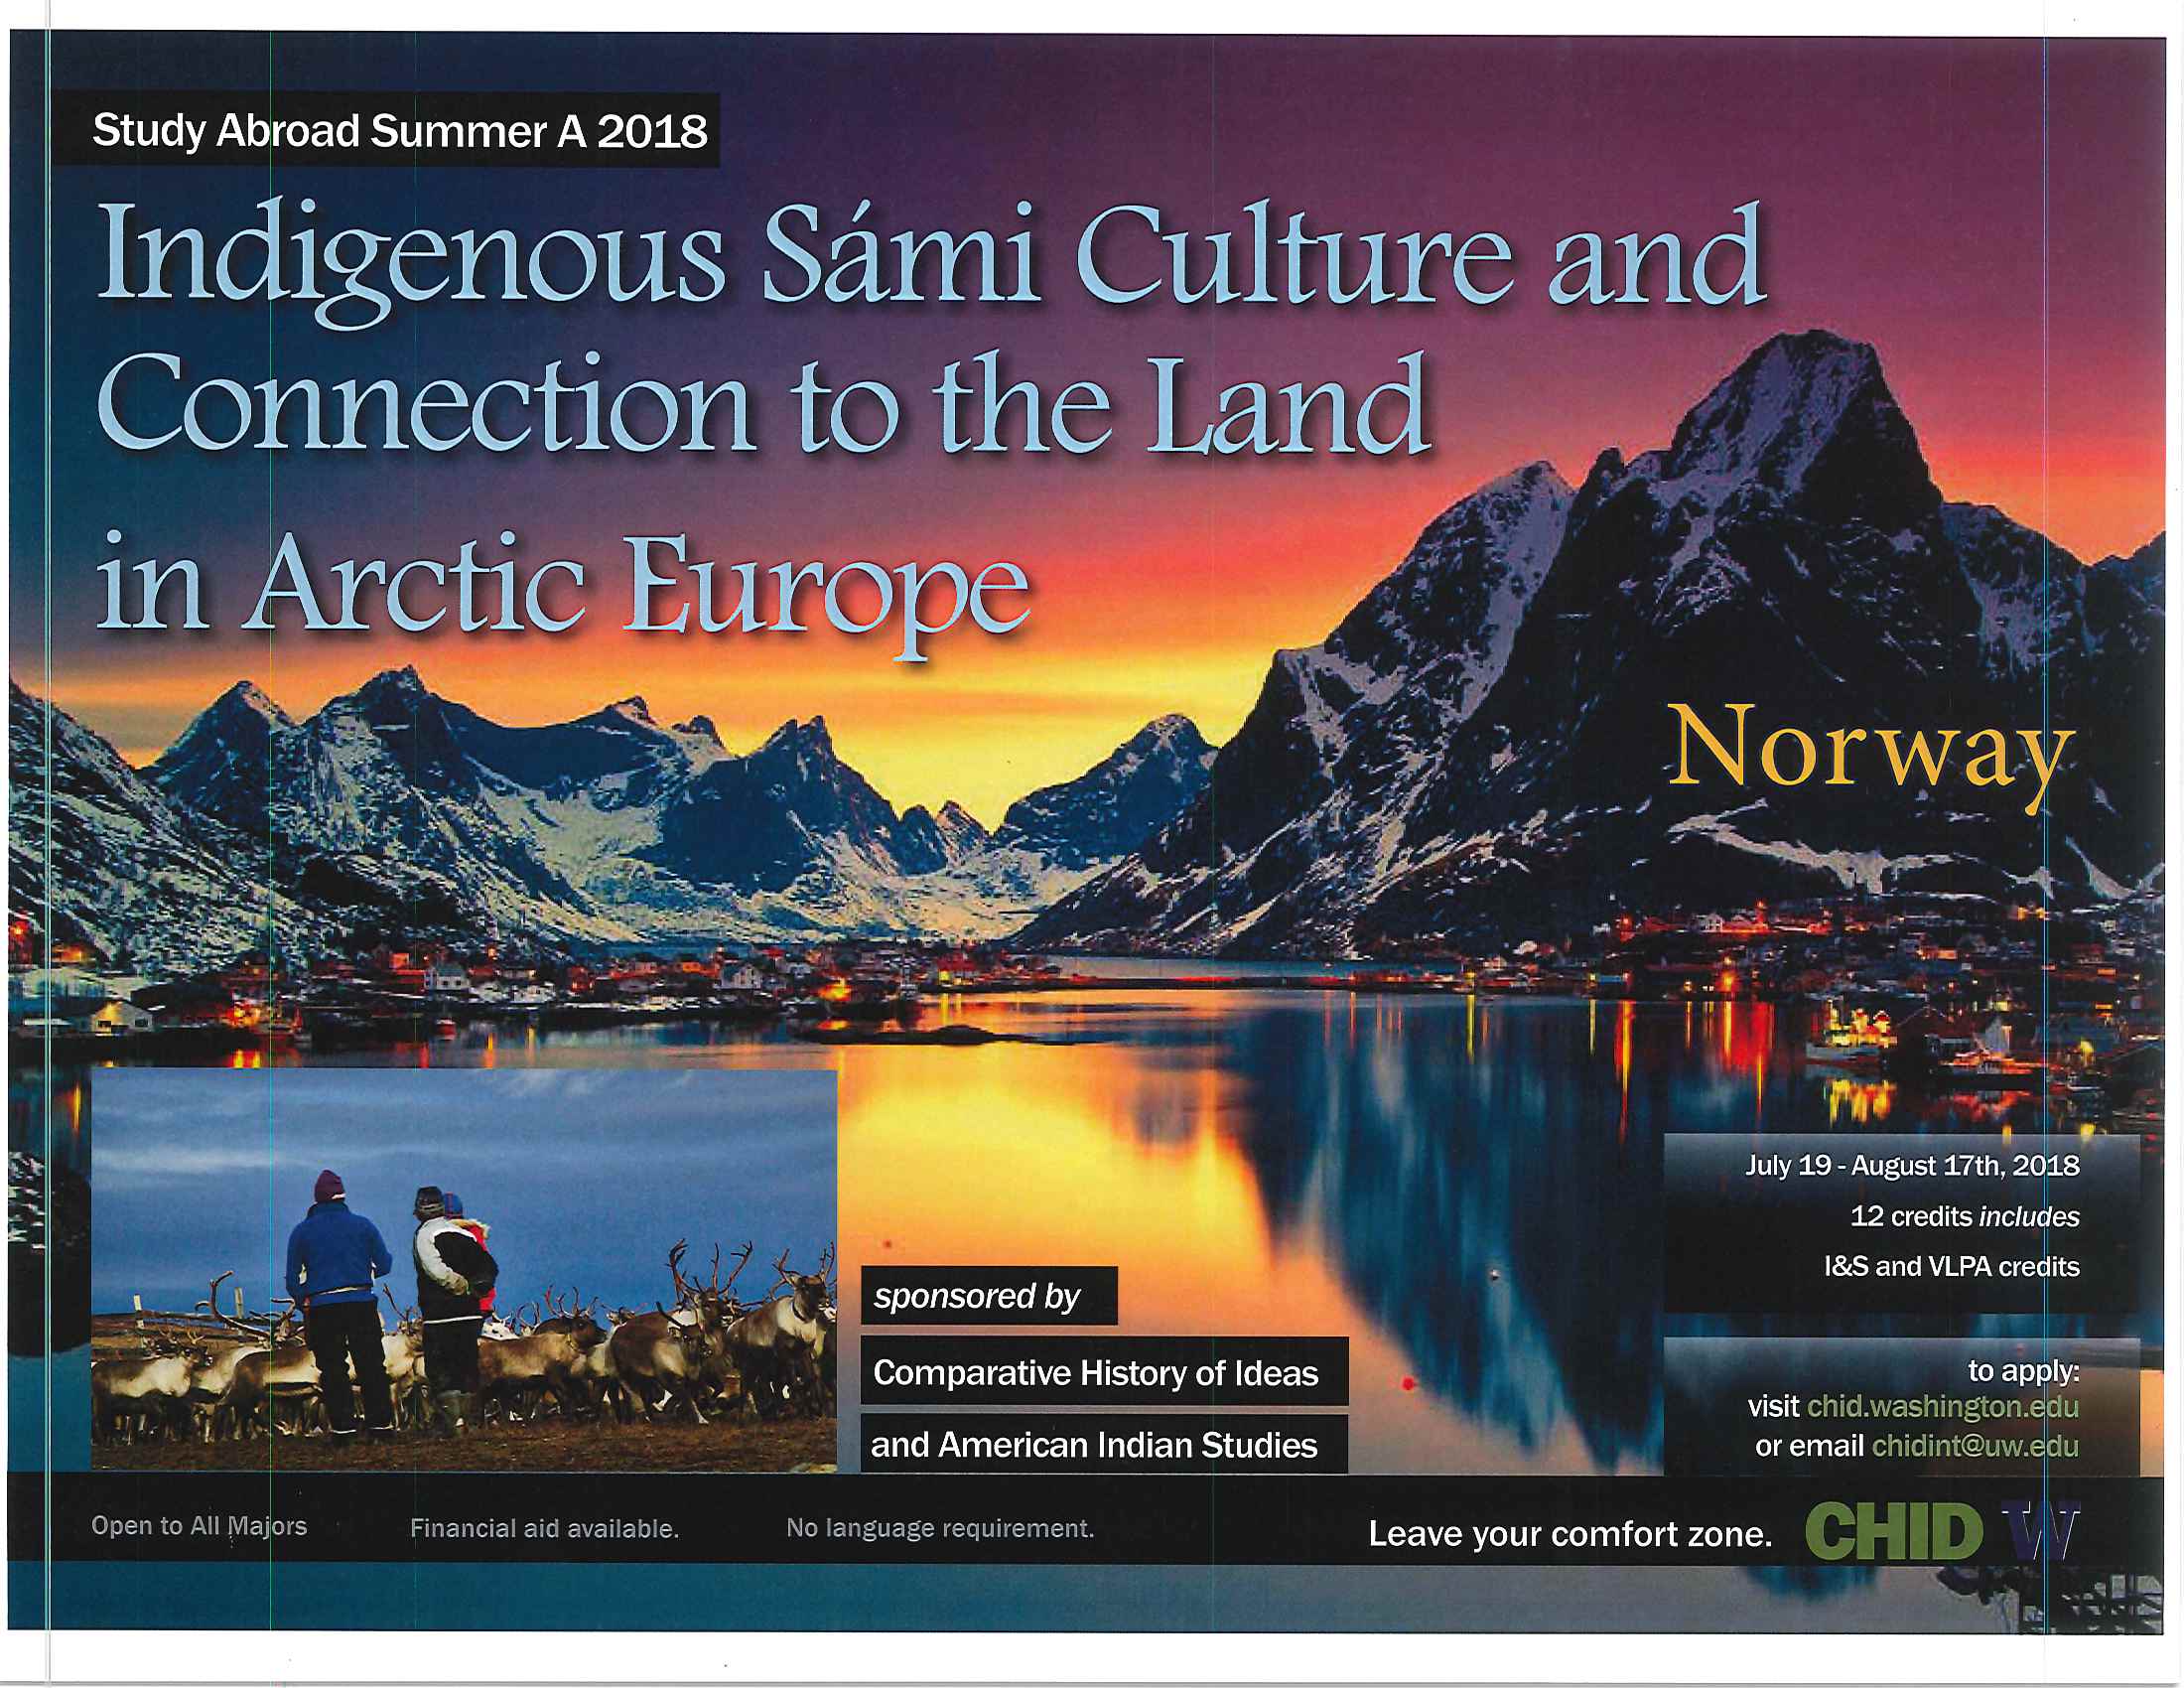 Indigenous Sami Culture and Connection to the Land in Arctic Europe